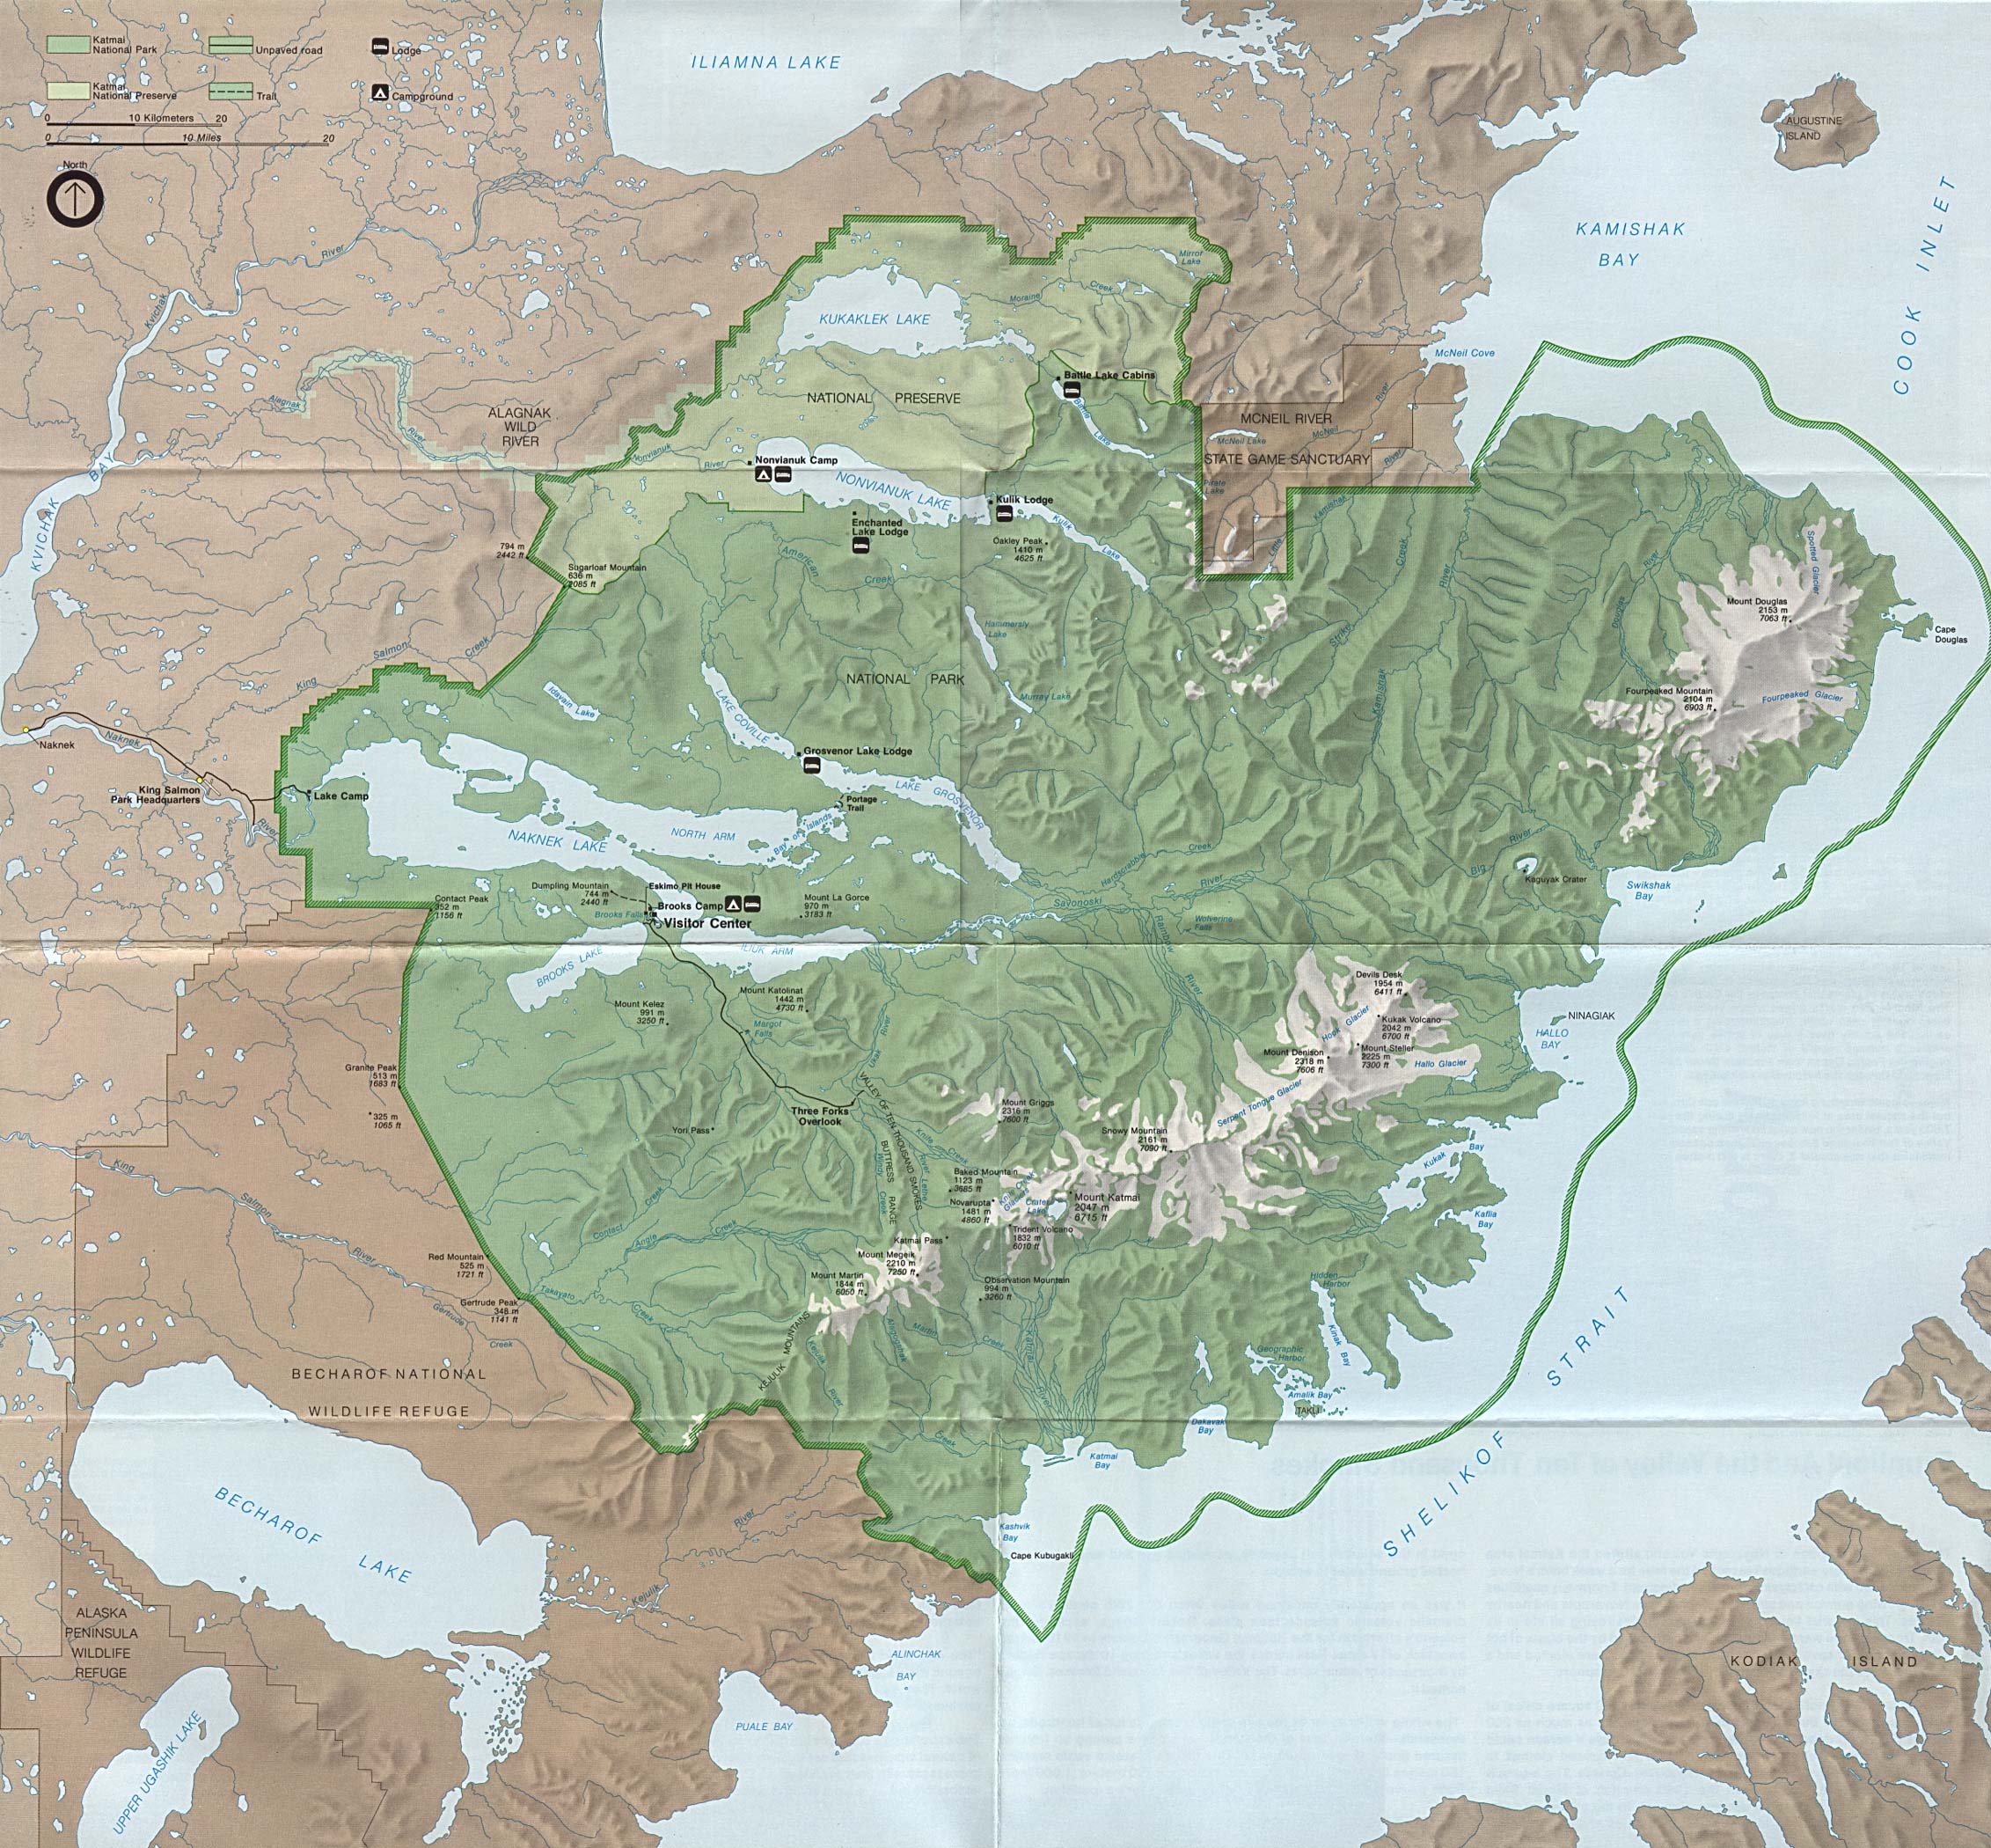  Maps of United States National Parks, Monuments and Historic Sites Katmai National Park and Preserve [Alaska] (Park Map) 1988 (748K) 